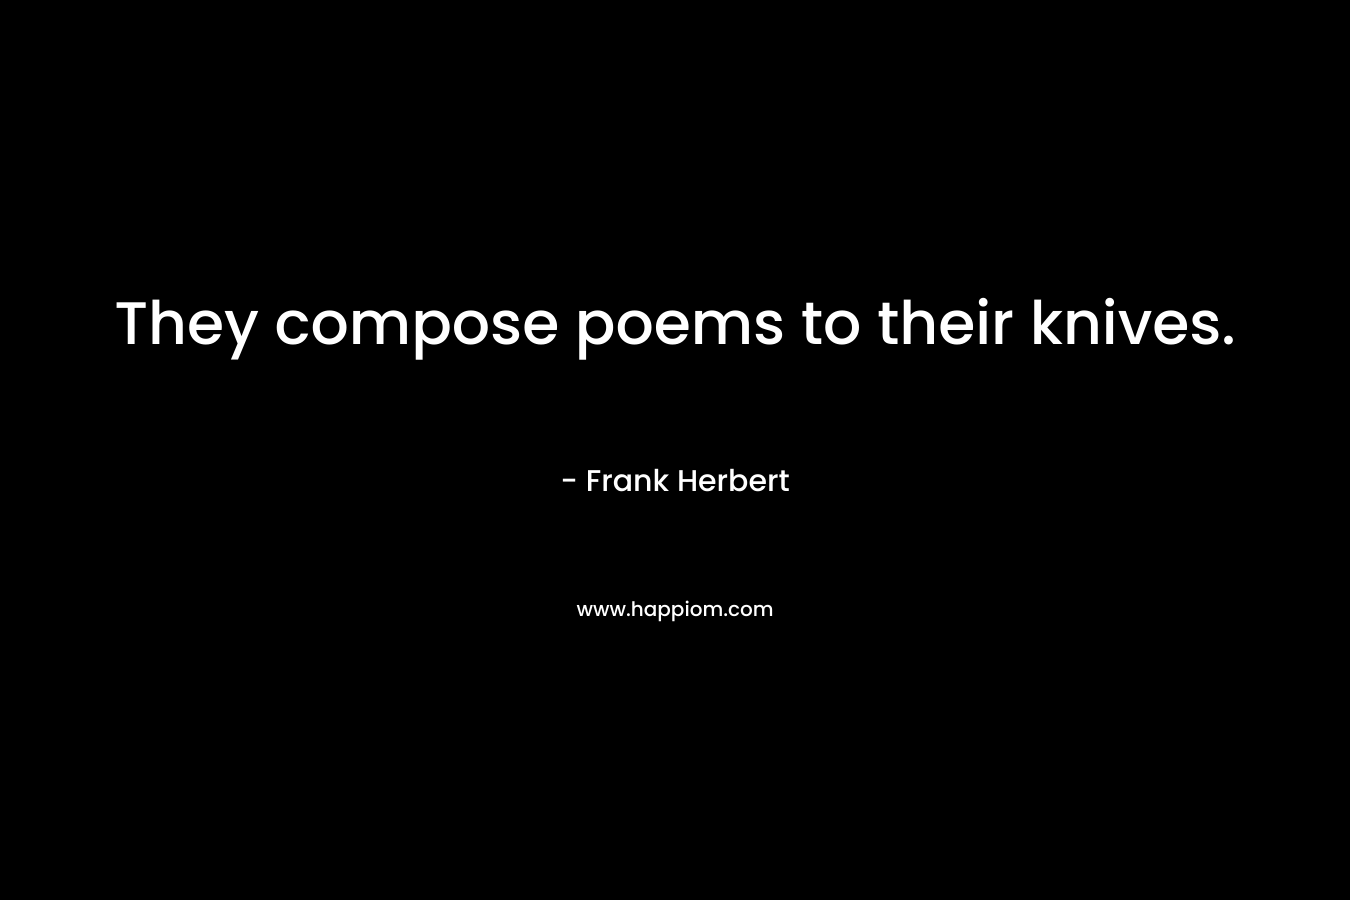 They compose poems to their knives. – Frank Herbert